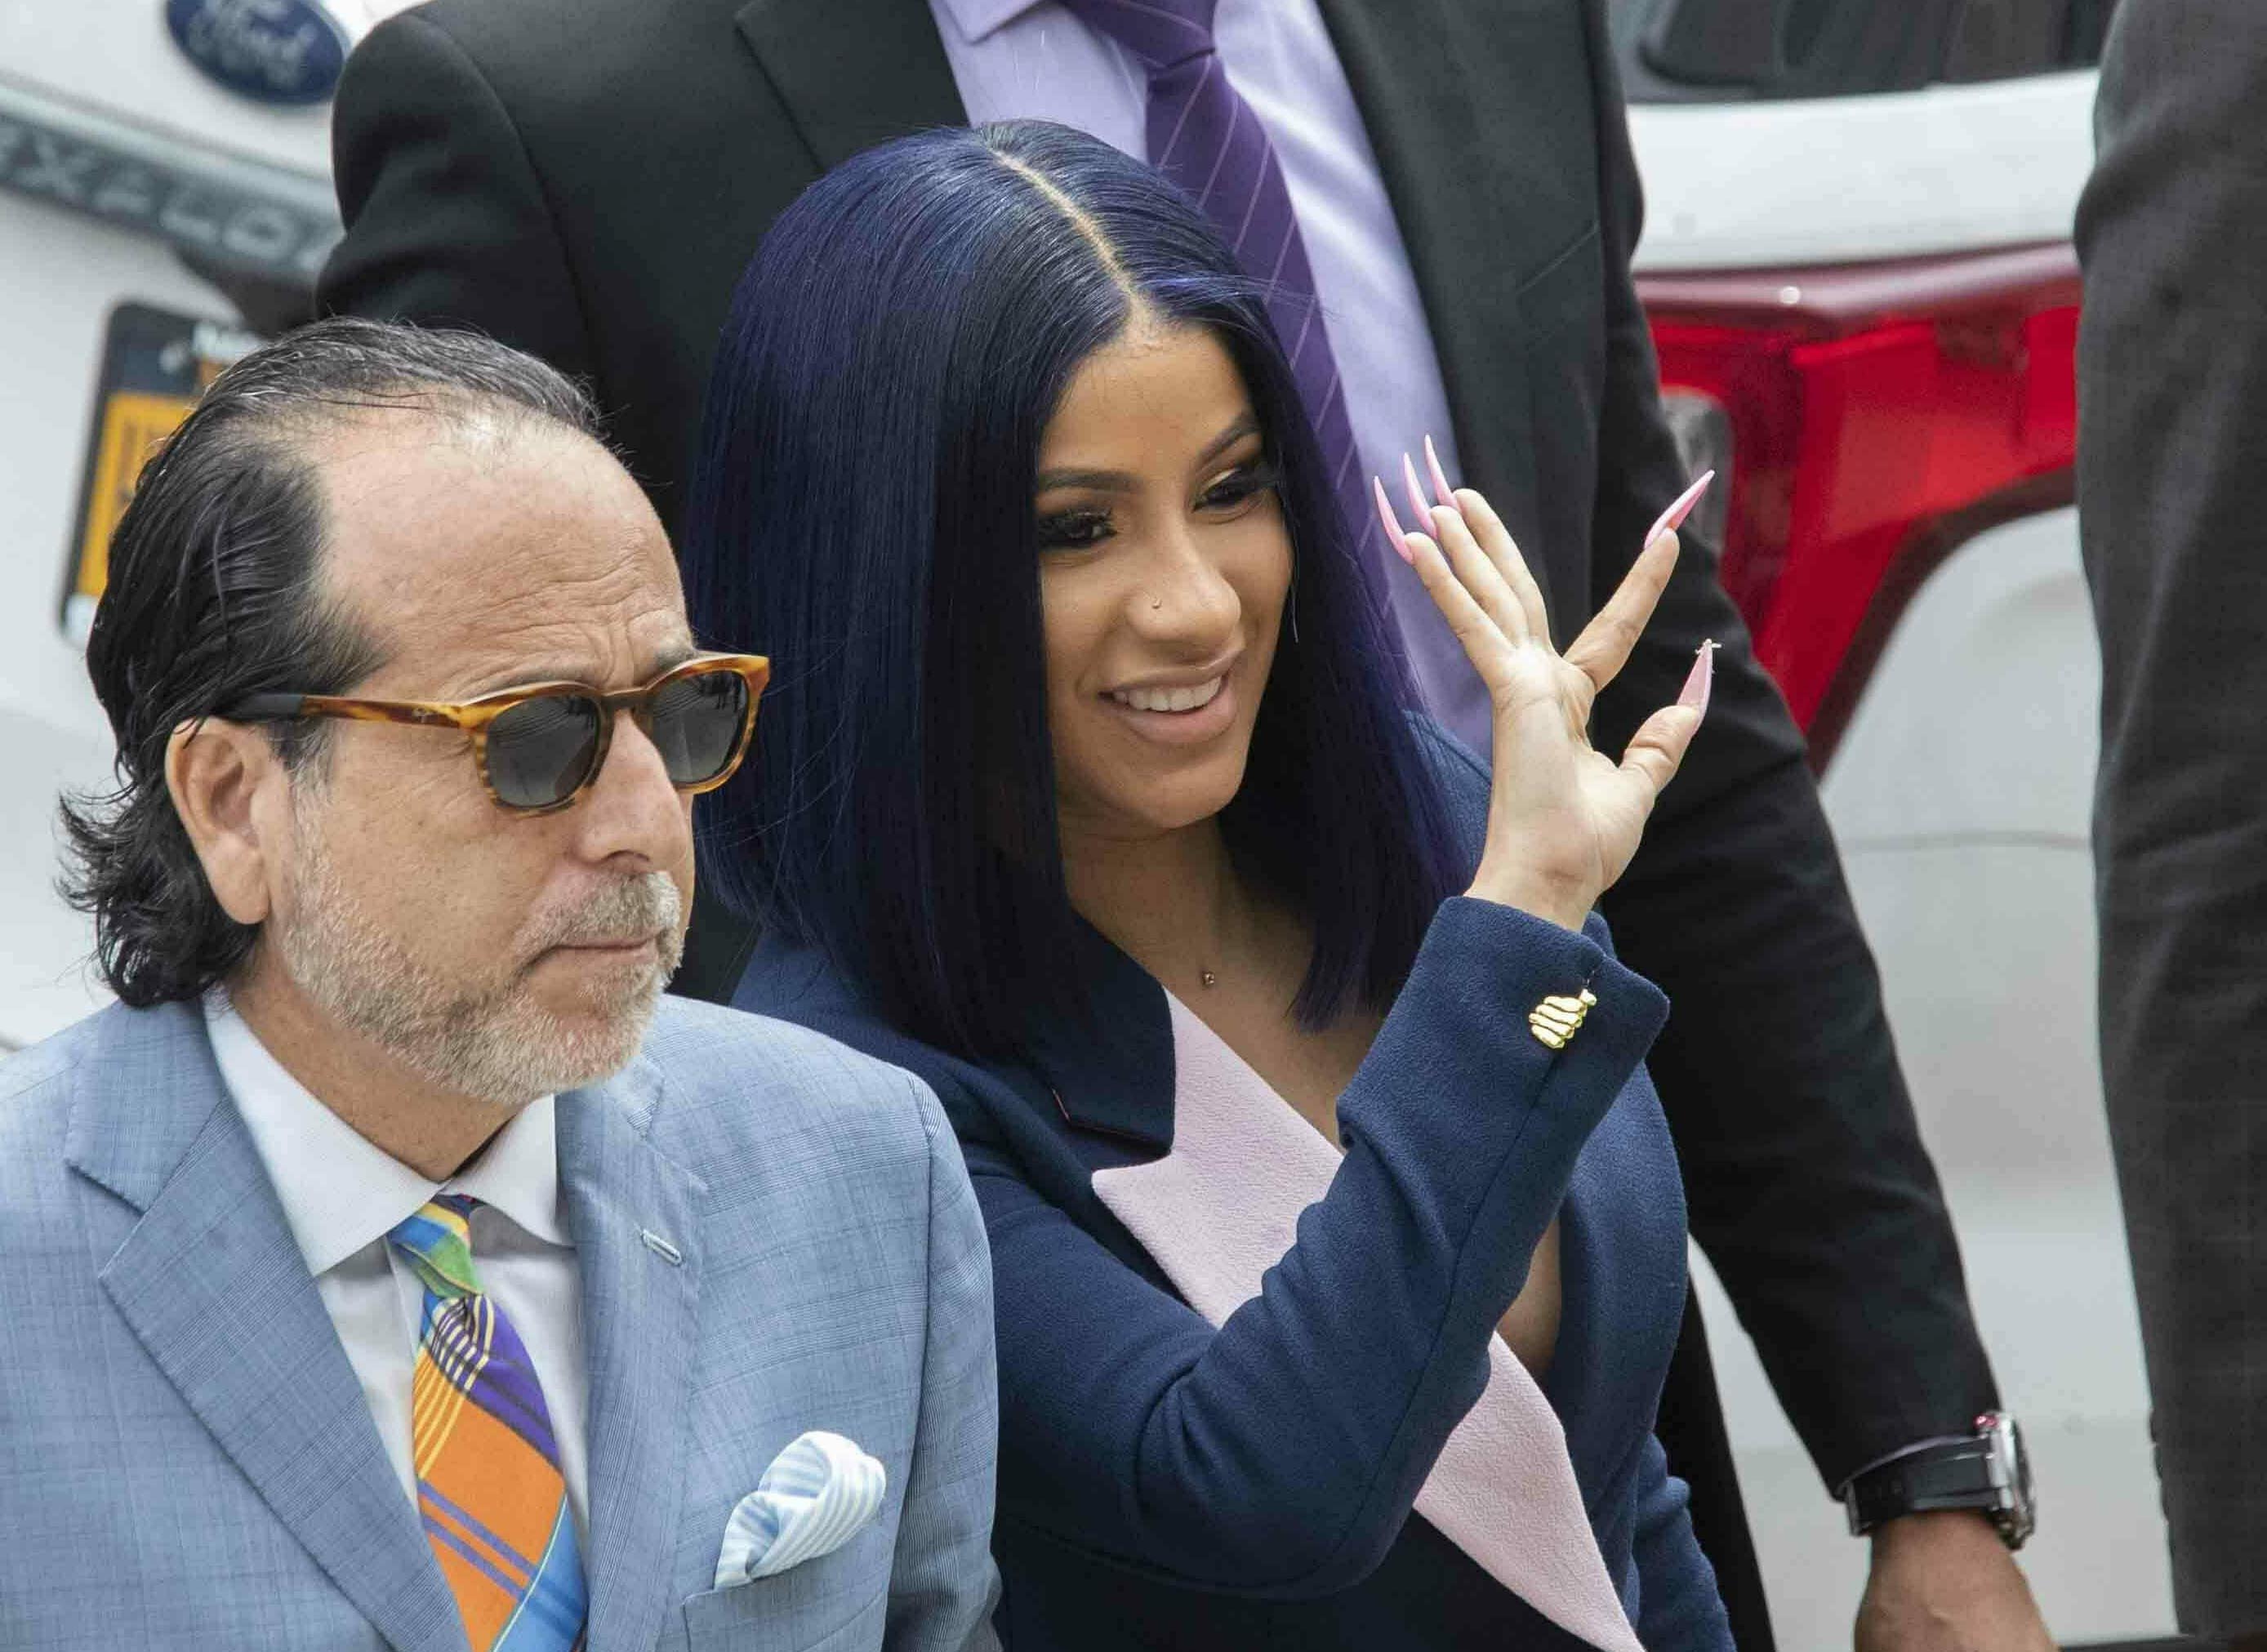 Grammy-winning rapper Cardi B, right, waves at fans as she arrives for a hearing at Queens County Criminal Court, Tuesday, June 25, 2019, in New York. Photo: AP